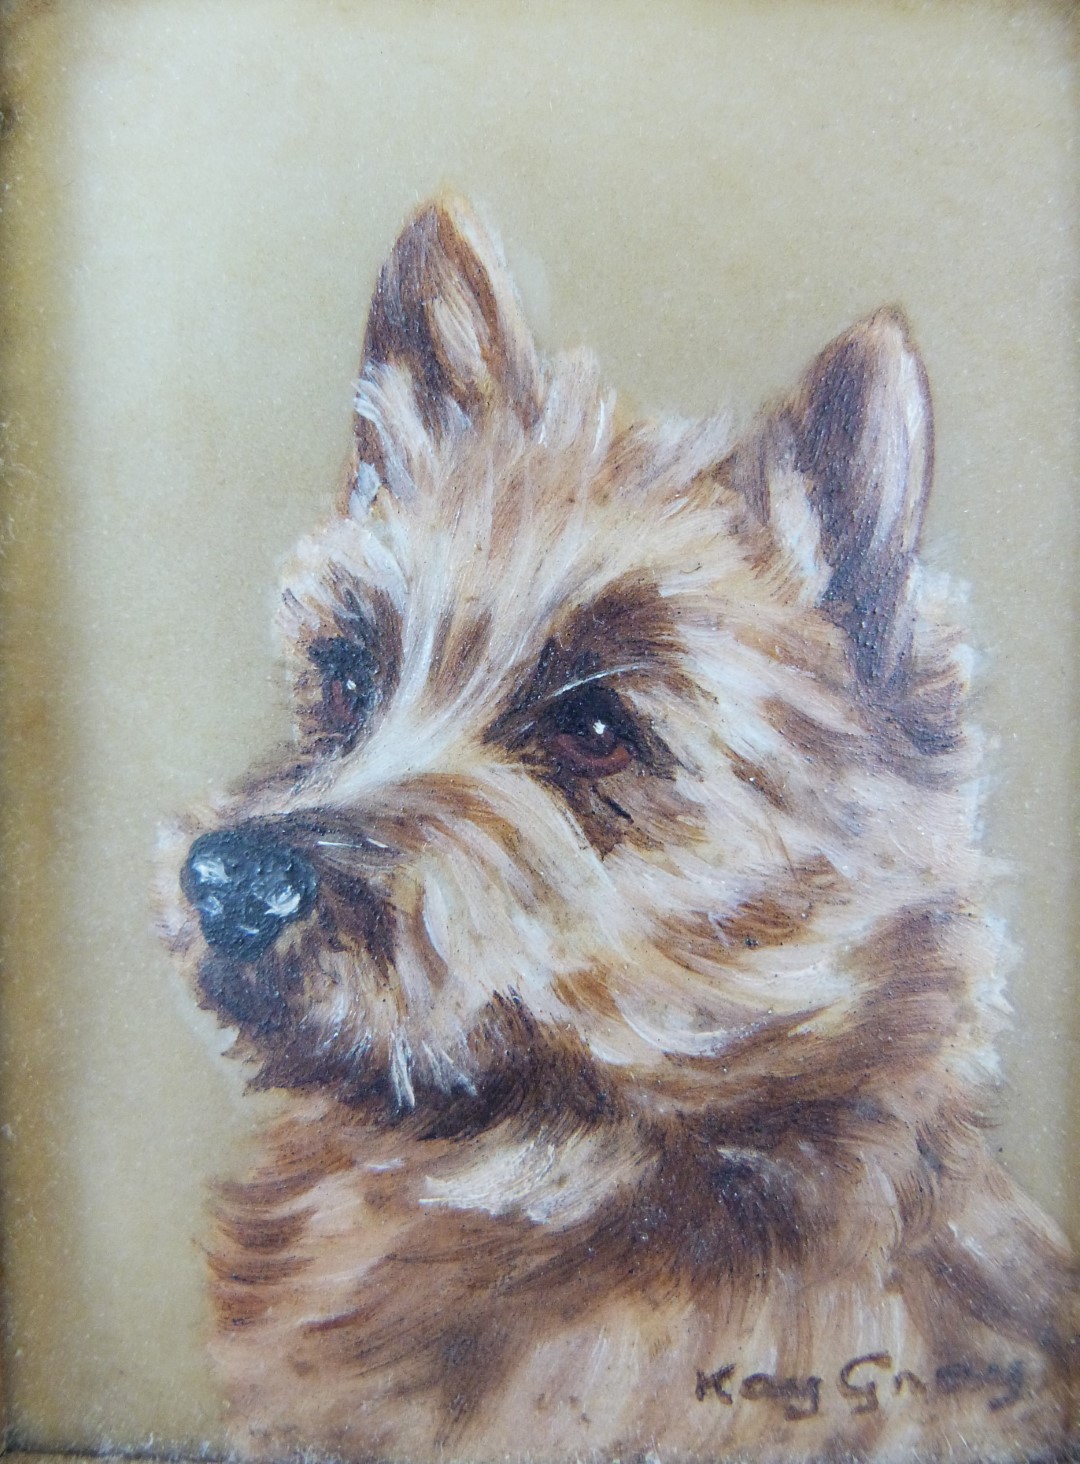 Kay Gray portrait miniature of a Cairn terrier dog, signed lower right, 6 x 4.5cm, together with - Image 4 of 5